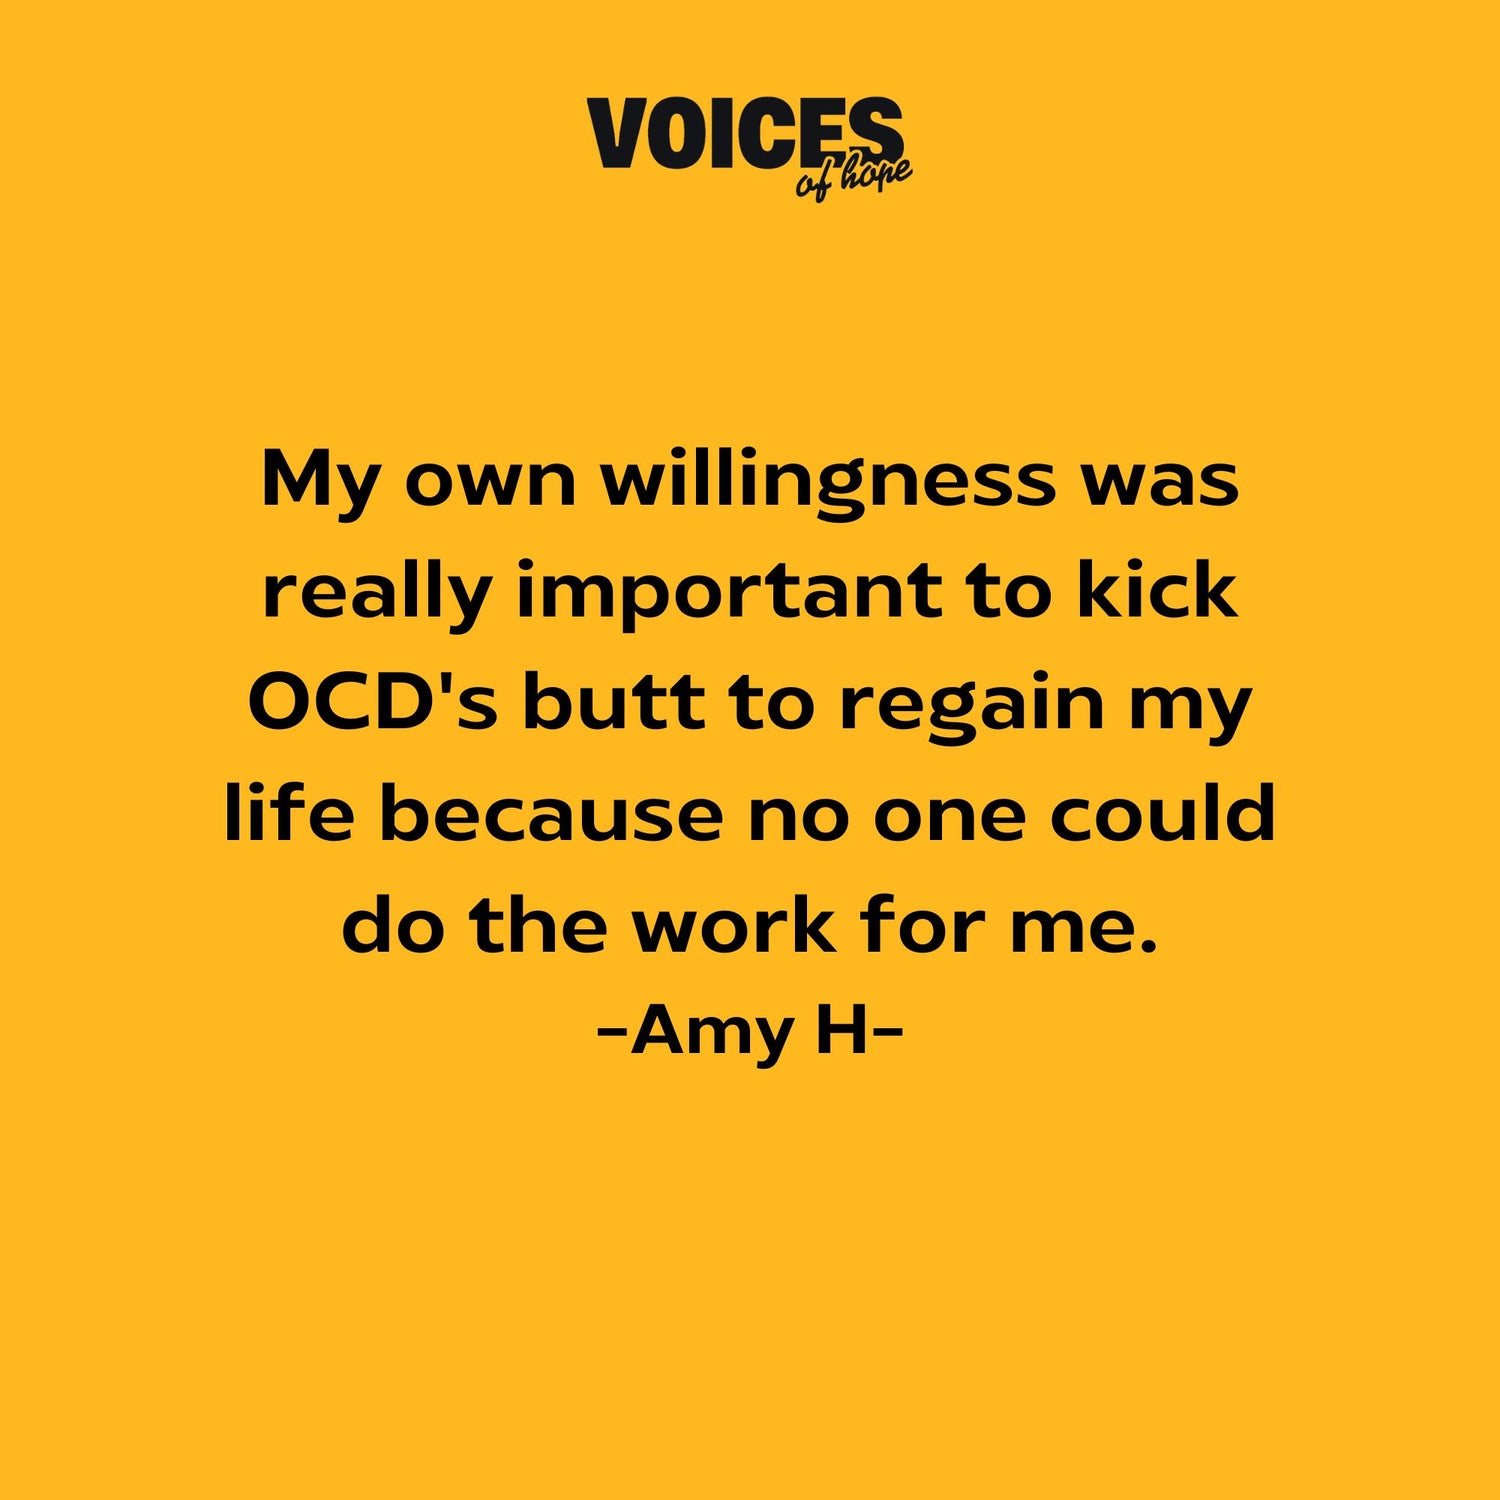 Yellow background with black writing that reads: "my own willingness was really important to kick OCD's butt to regain my life because no one could do the work for me. Amy H."